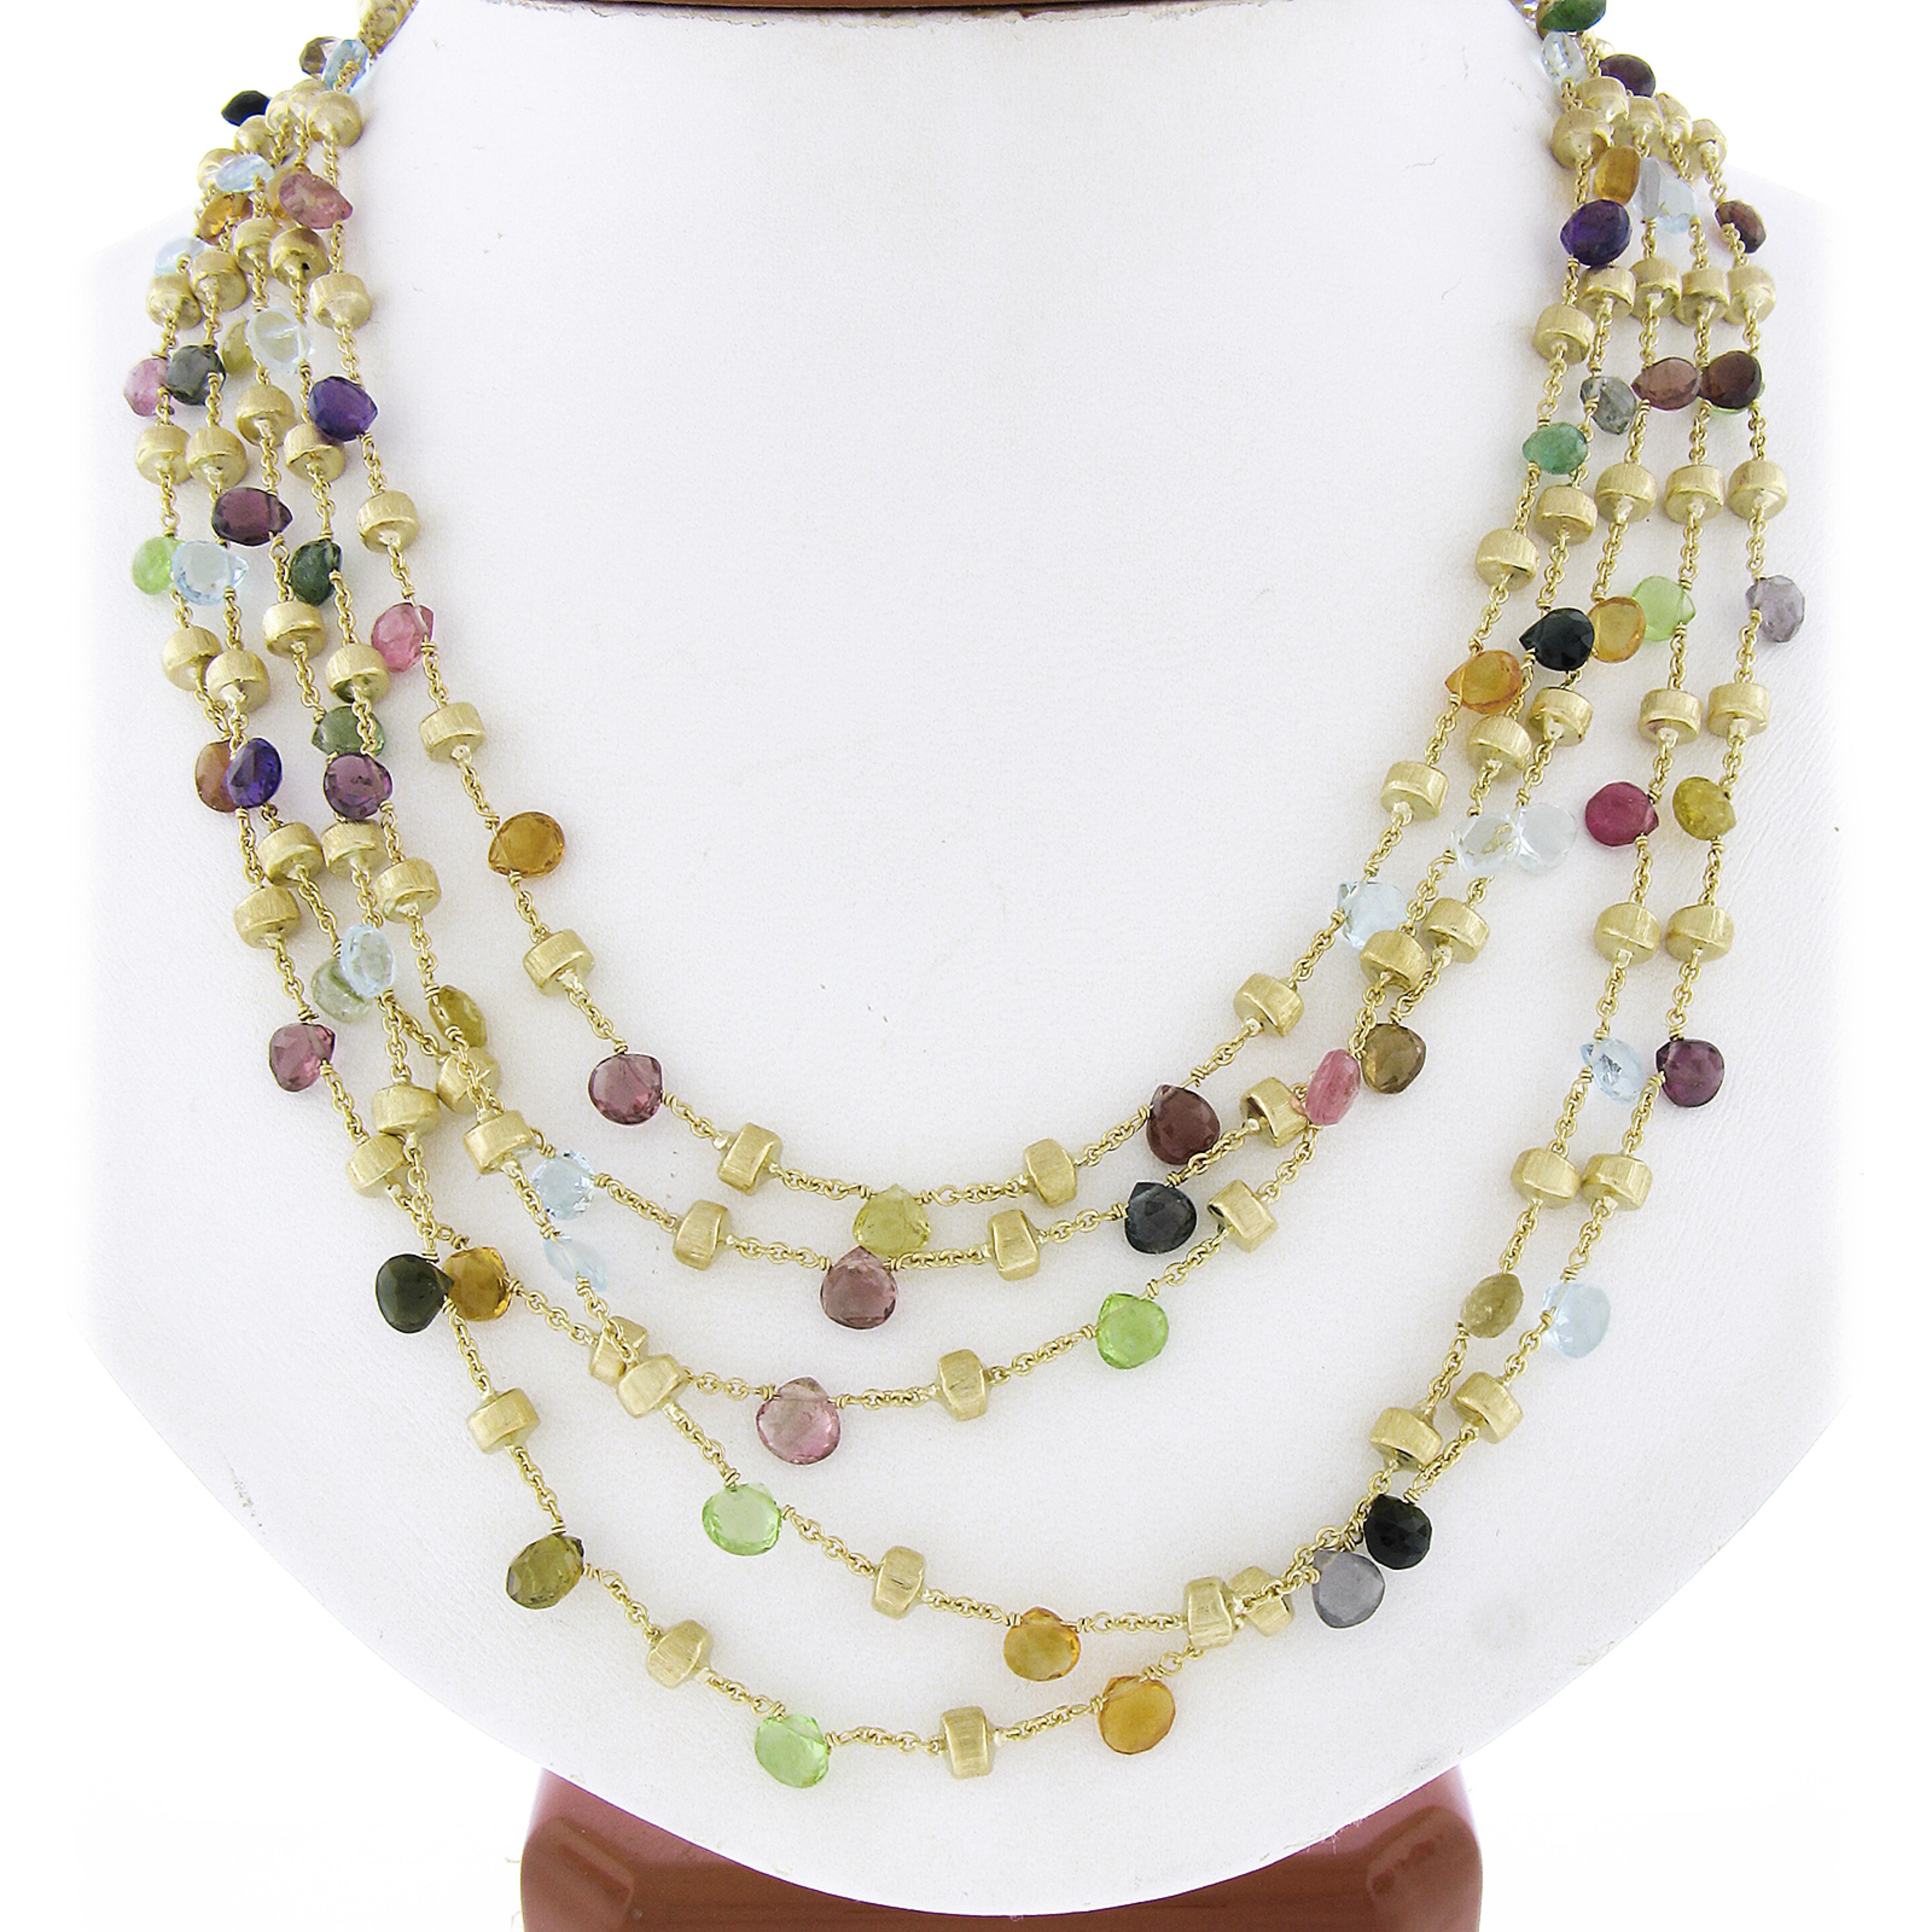 Material: Solid 18k Yellow Gold 
Weight: 50.64 Grams
Stone(s): Numerous Natural Genuine Multi Stones -  Briolette Cut - Strung - Green, Purple, Pink, Blue, Yellow, Black & Gray Color 
Chain Type: Station, 5 Bead Strand
Length: 16 Inches Wearable